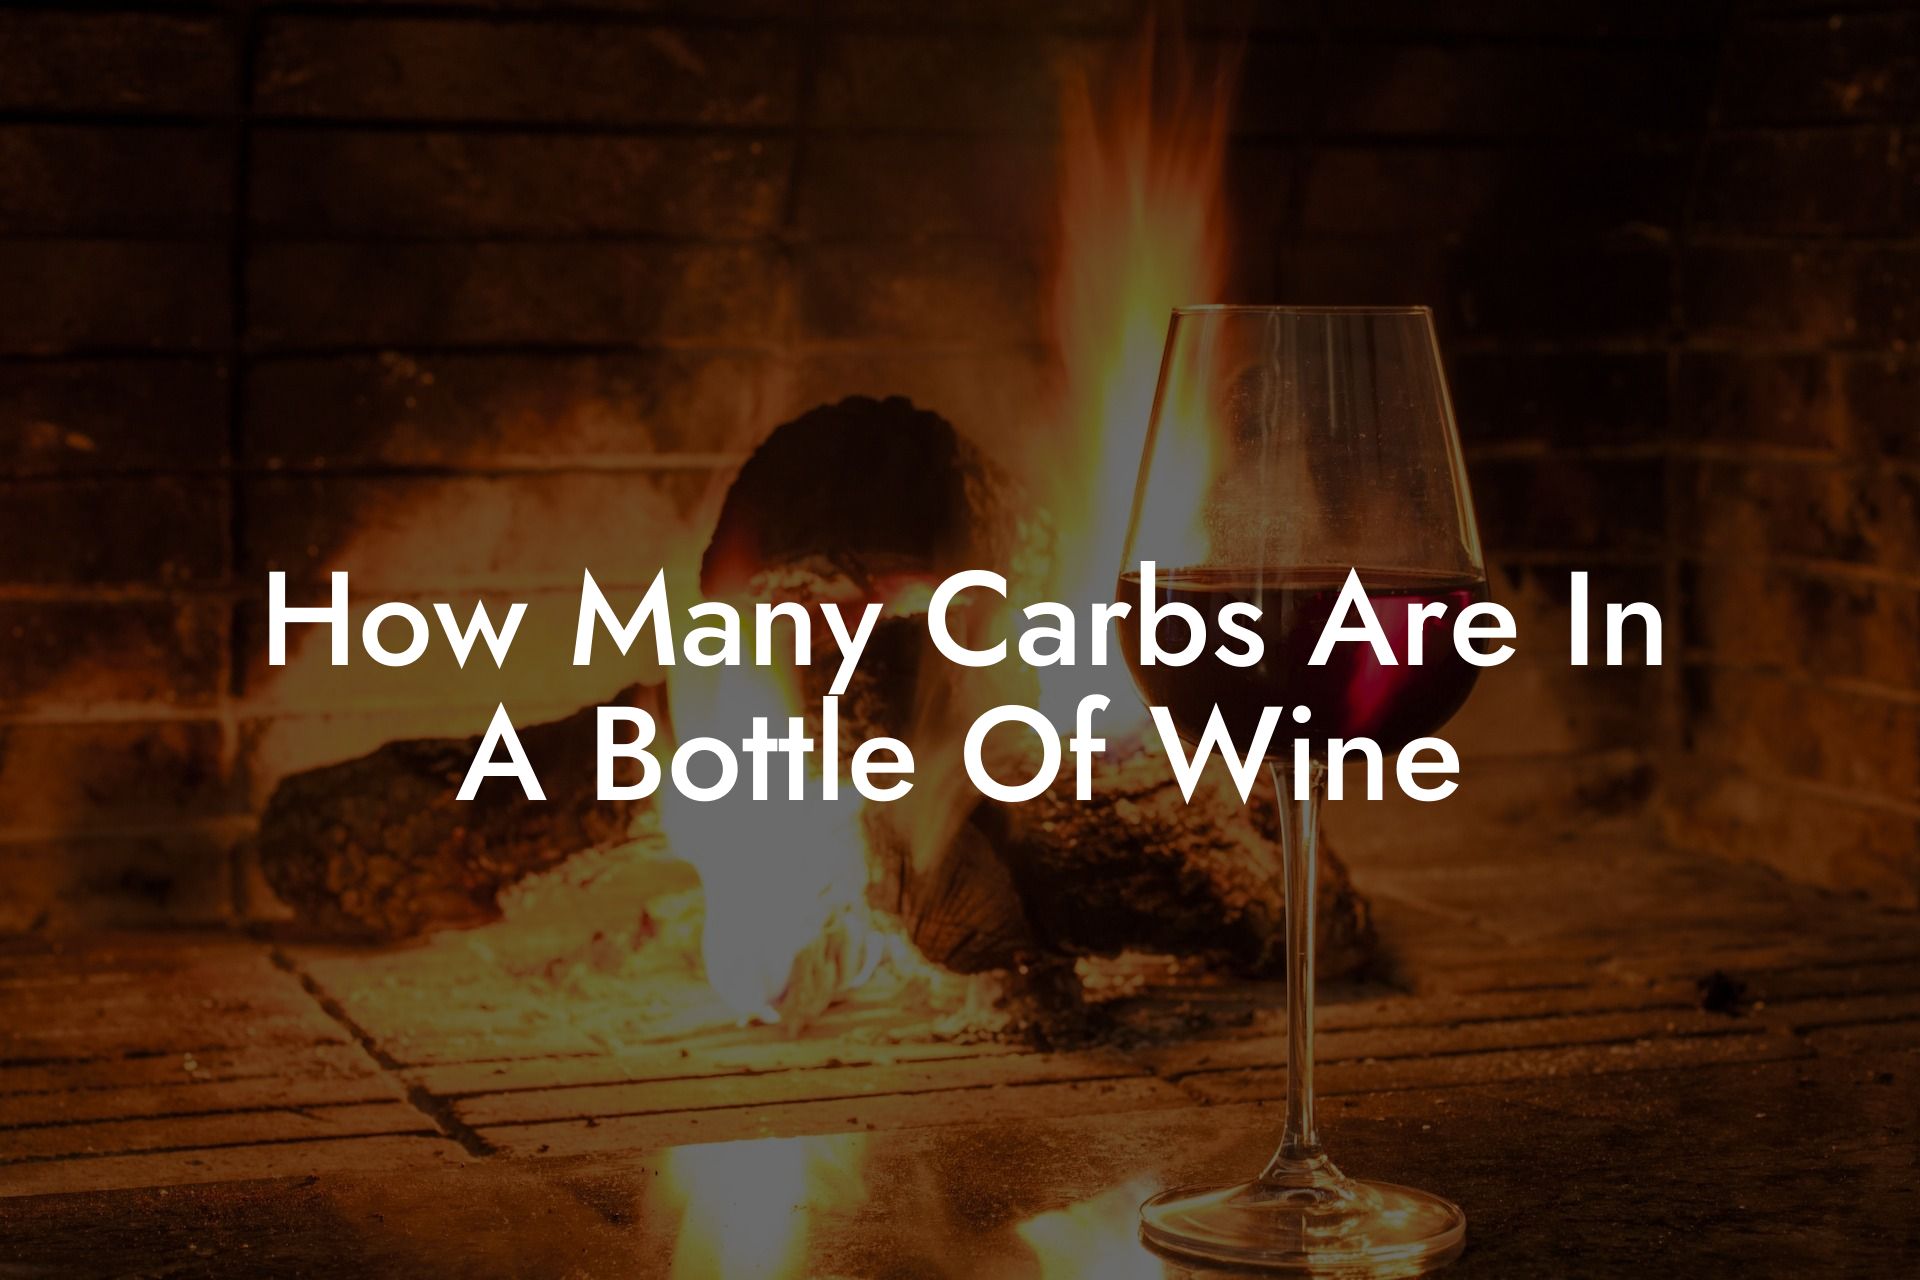 How Many Carbs Are In A Bottle Of Wine